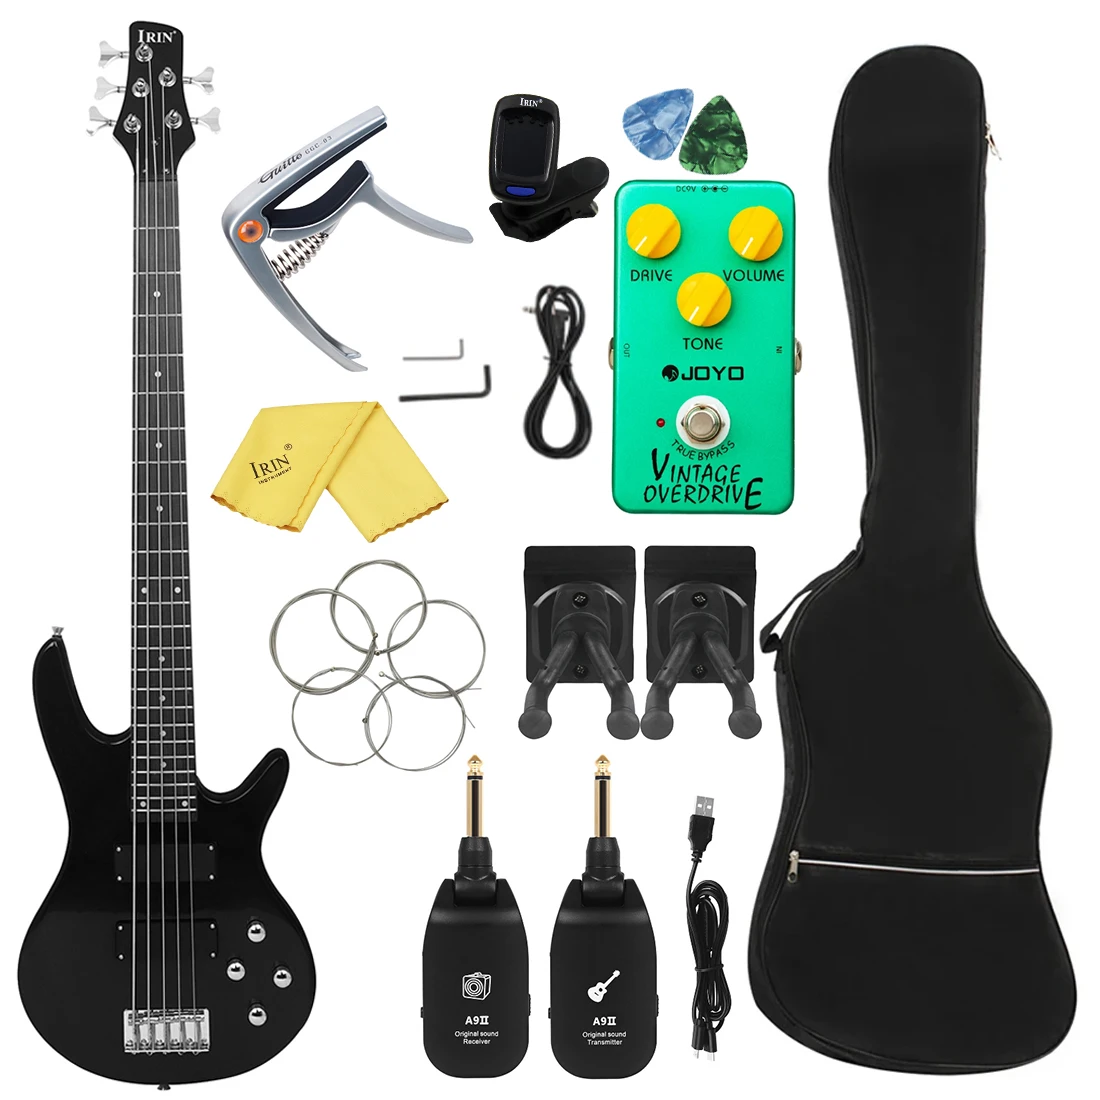 

IRIN 5 Strings Electric Bass Black 24 Frets Maple Body Neck Bass Guitar Stringed Instrument Guitarra with Tuner Strings Capo